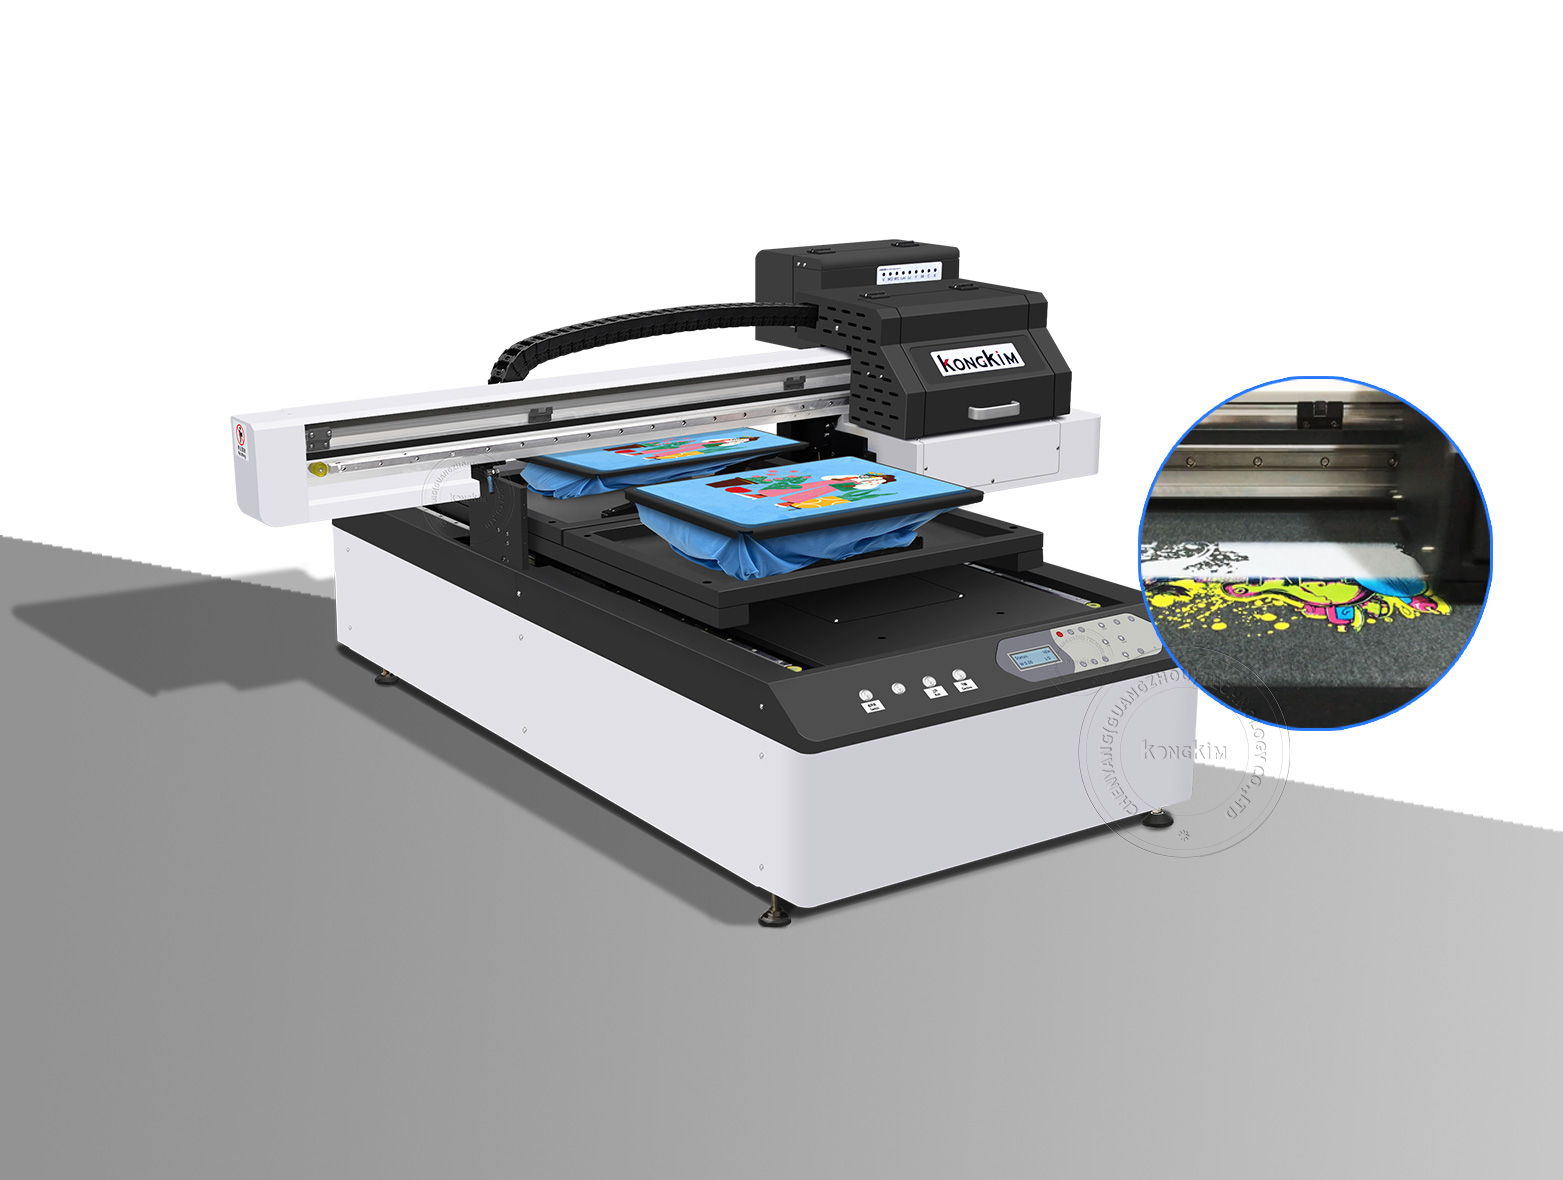 What are the advantages of DTG printers?